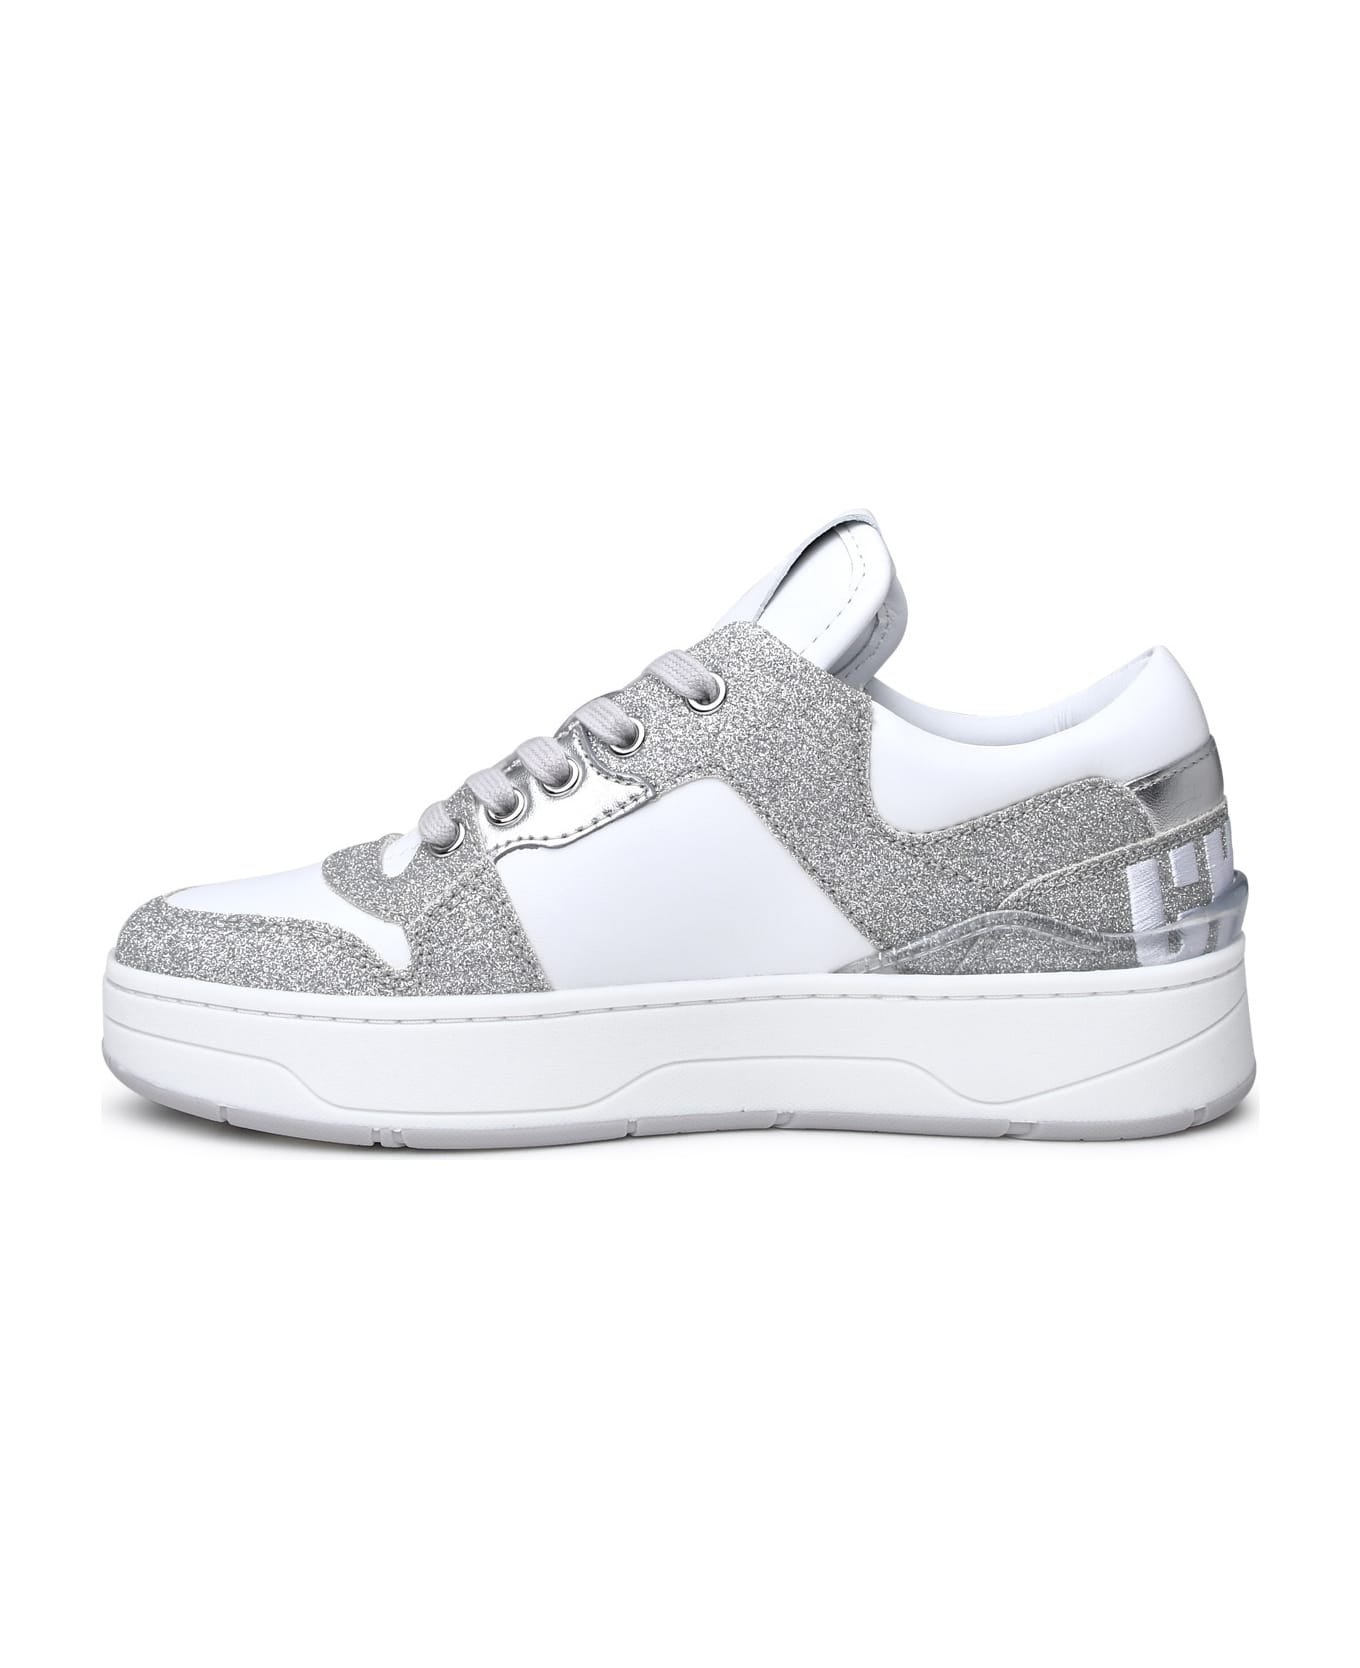 Jimmy Choo Cashmere White Leather Sneakers - White